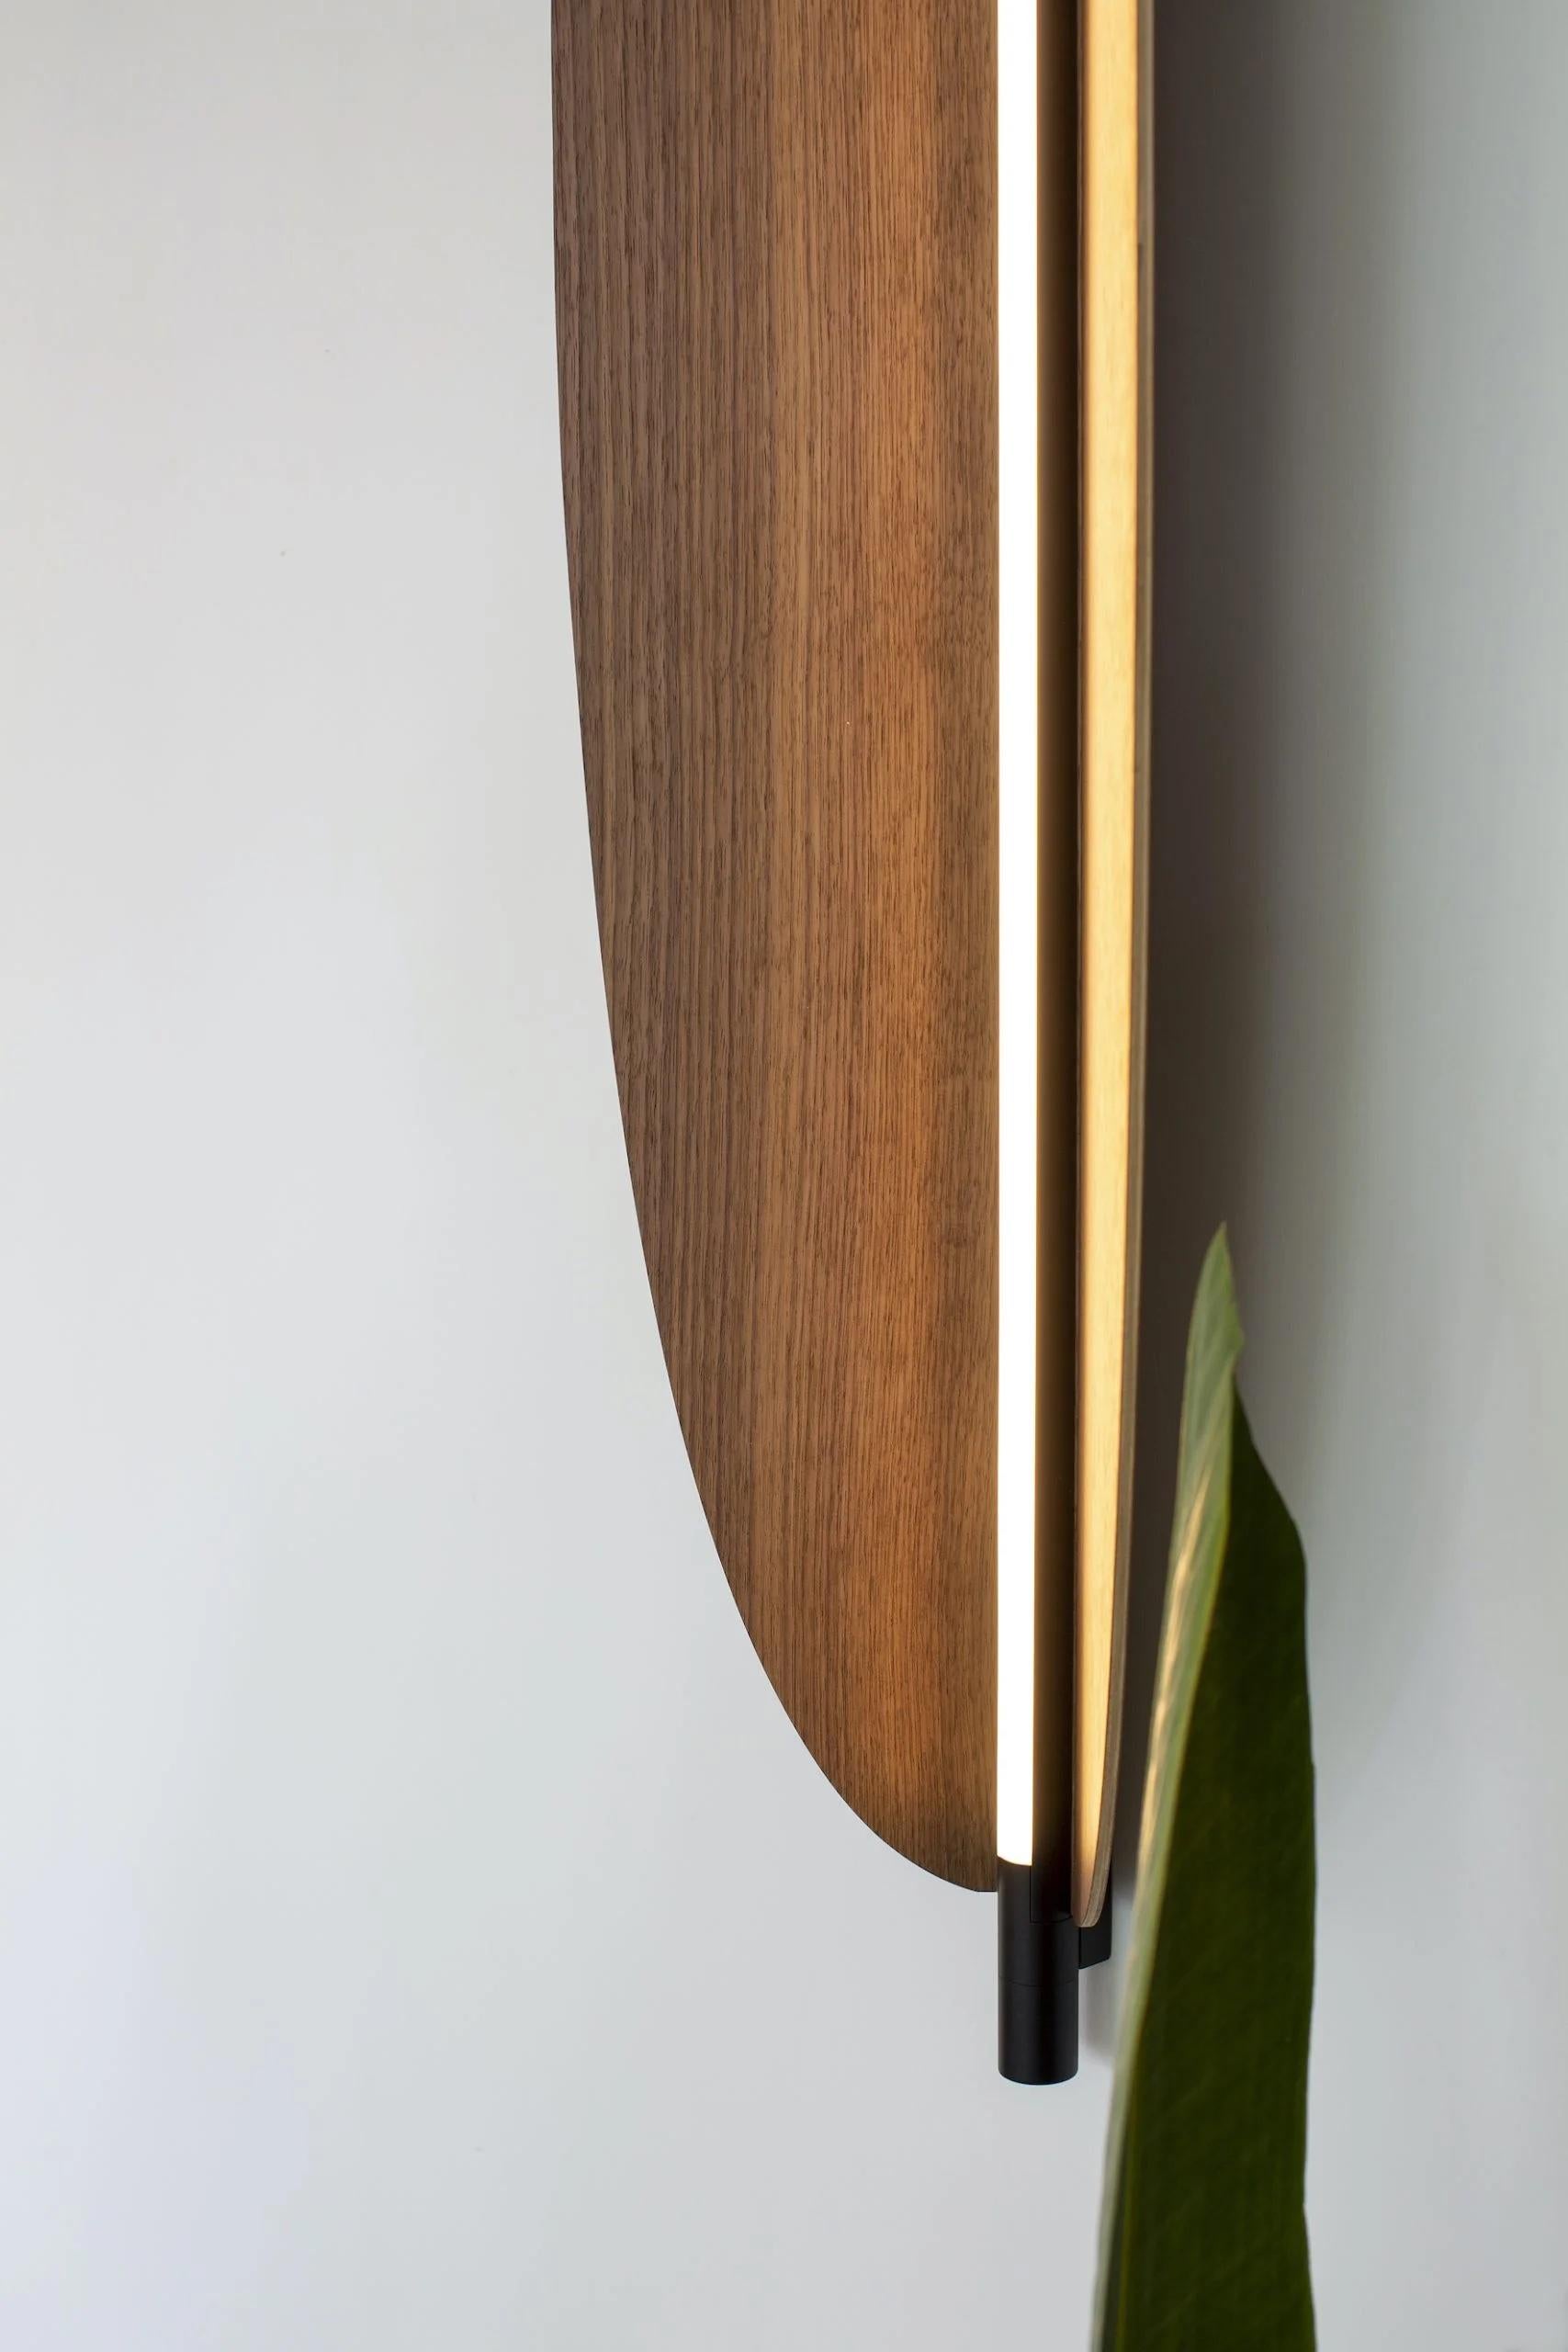 Italian Contemporary Wall Lamp 'Thula 562.43' by Federica Biasi x Tooy, Beige + Oak For Sale